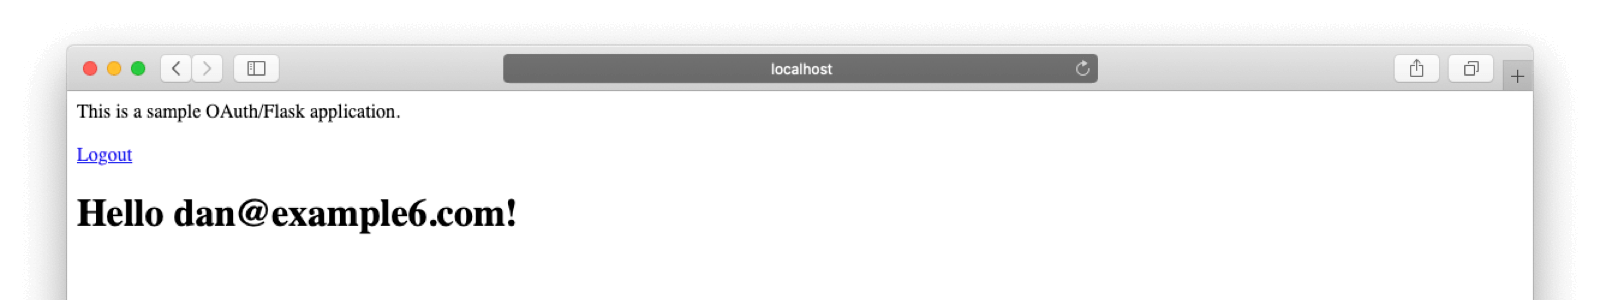 The portal page when you authenticate with OAuth.